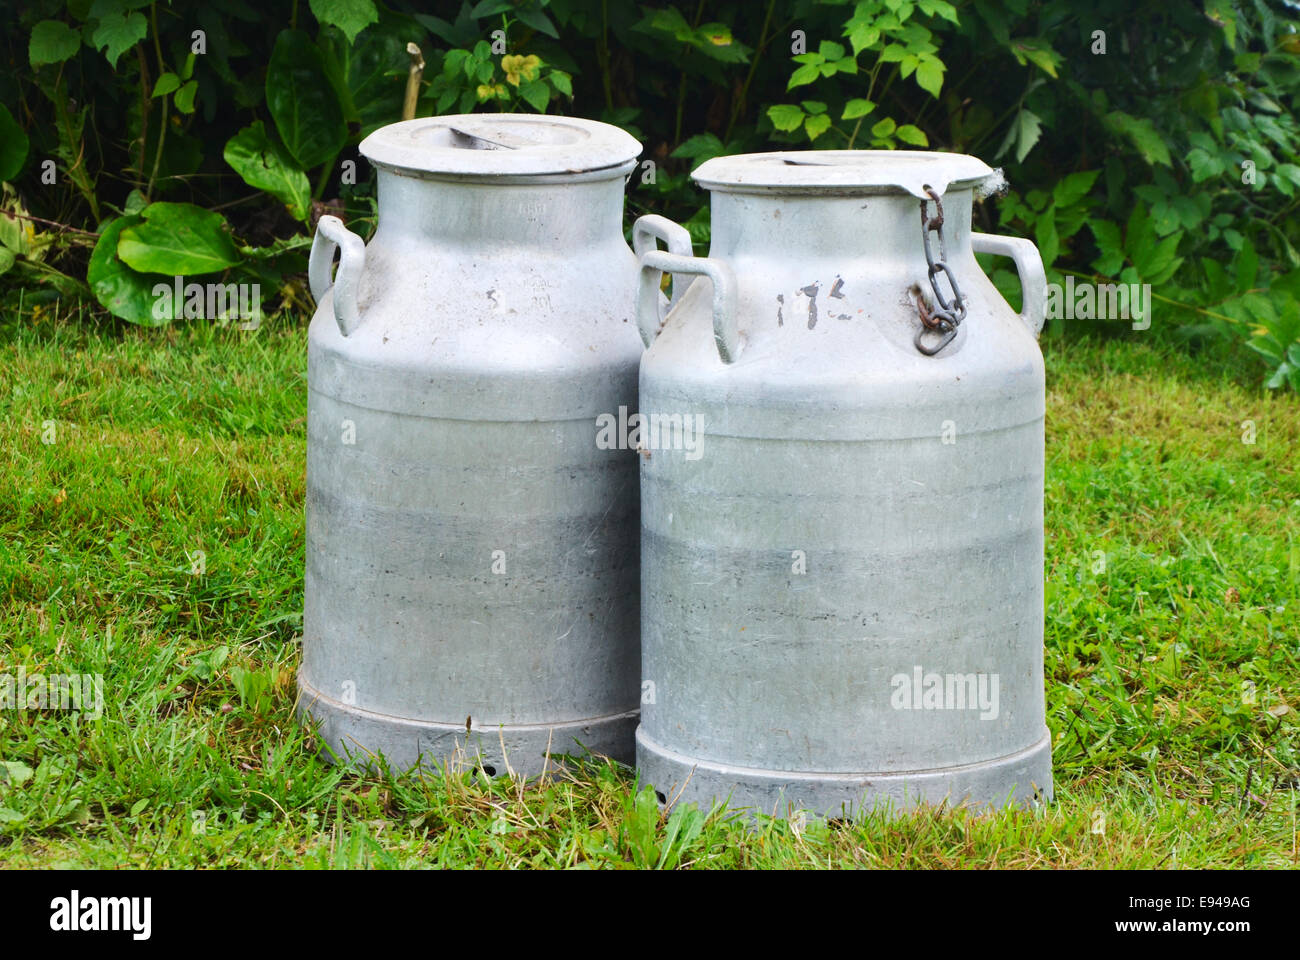 Two old milkcontainers Stock Photo